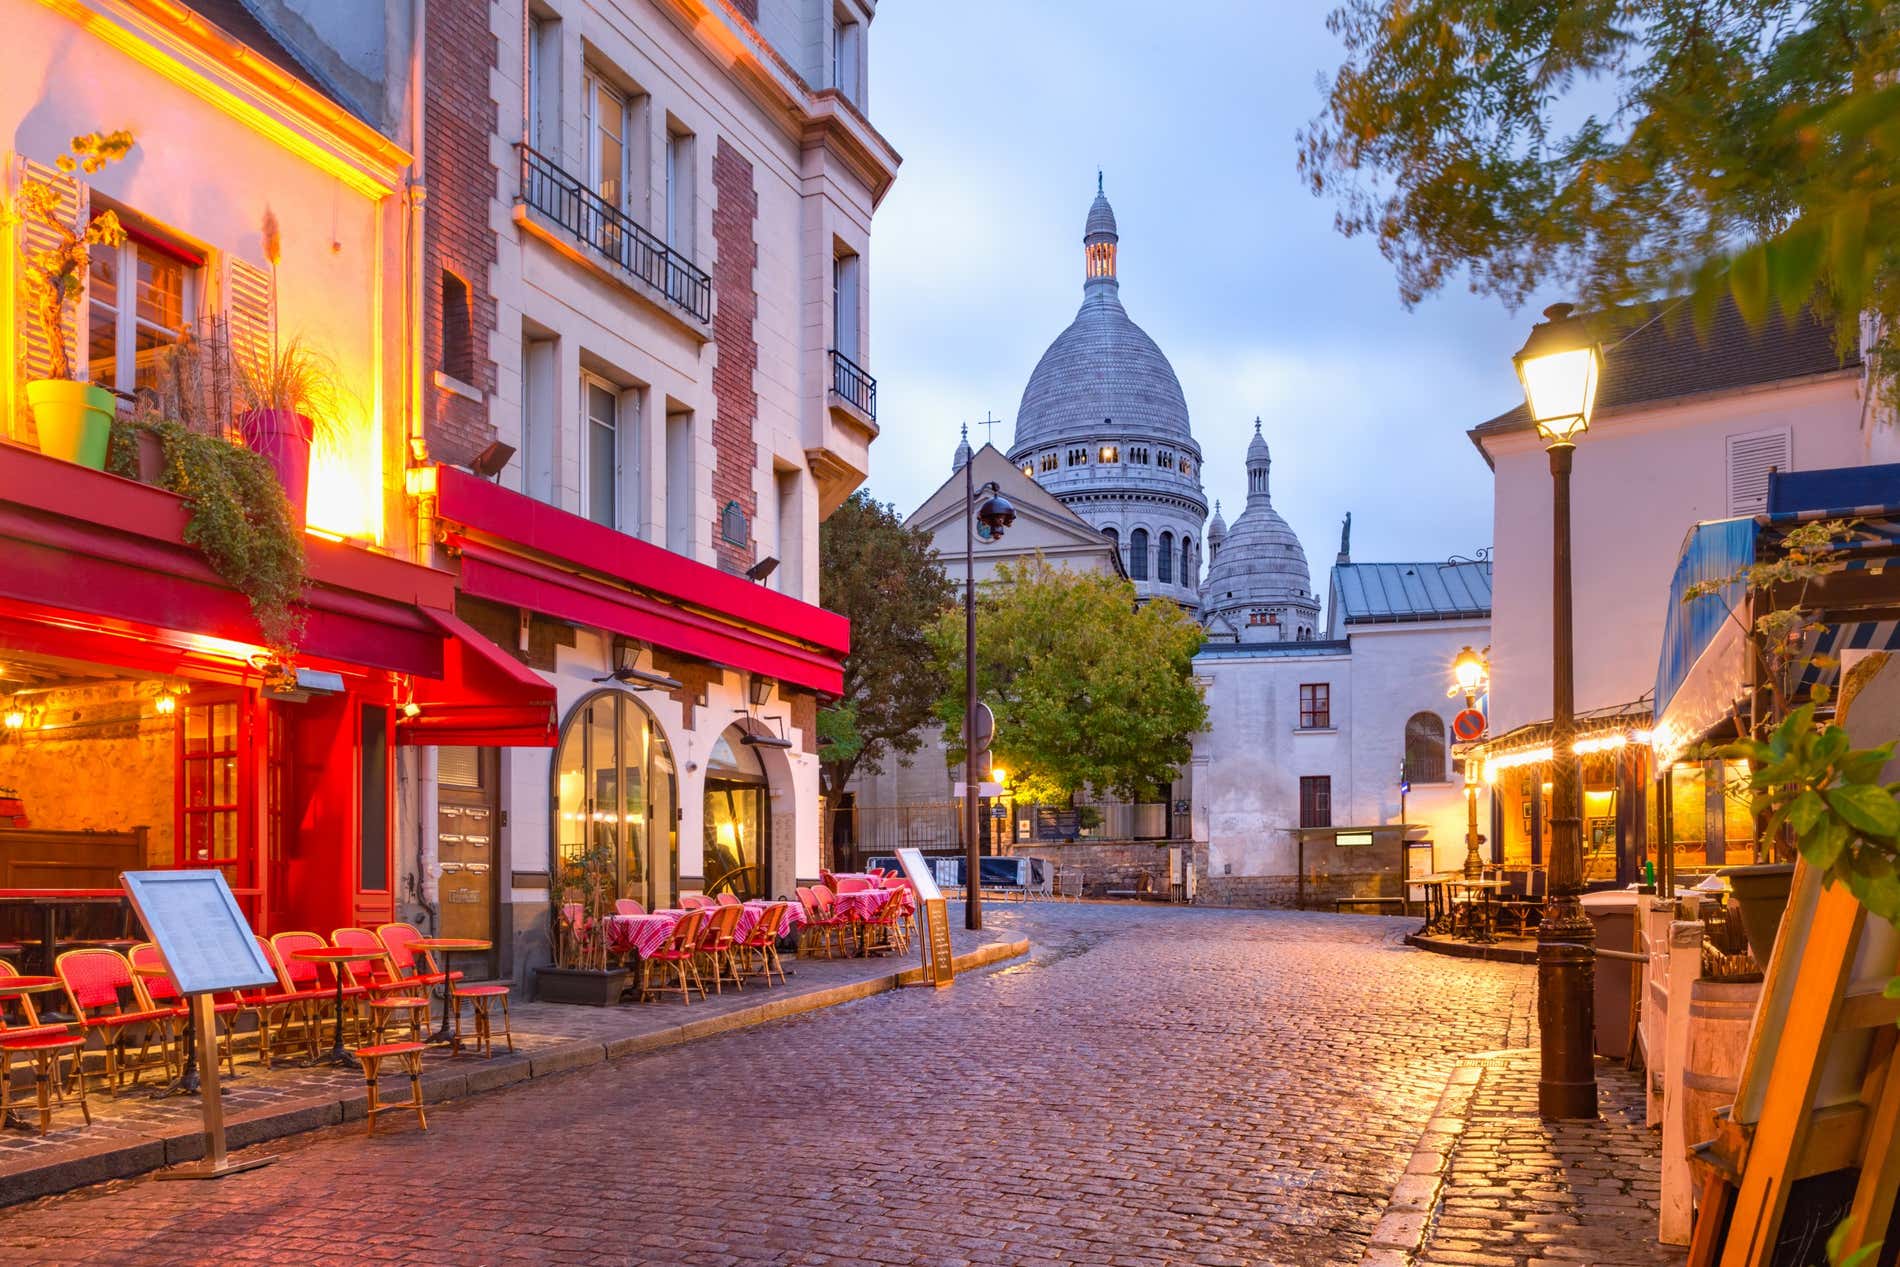 An image of Montmartre with street lights illuminating the street